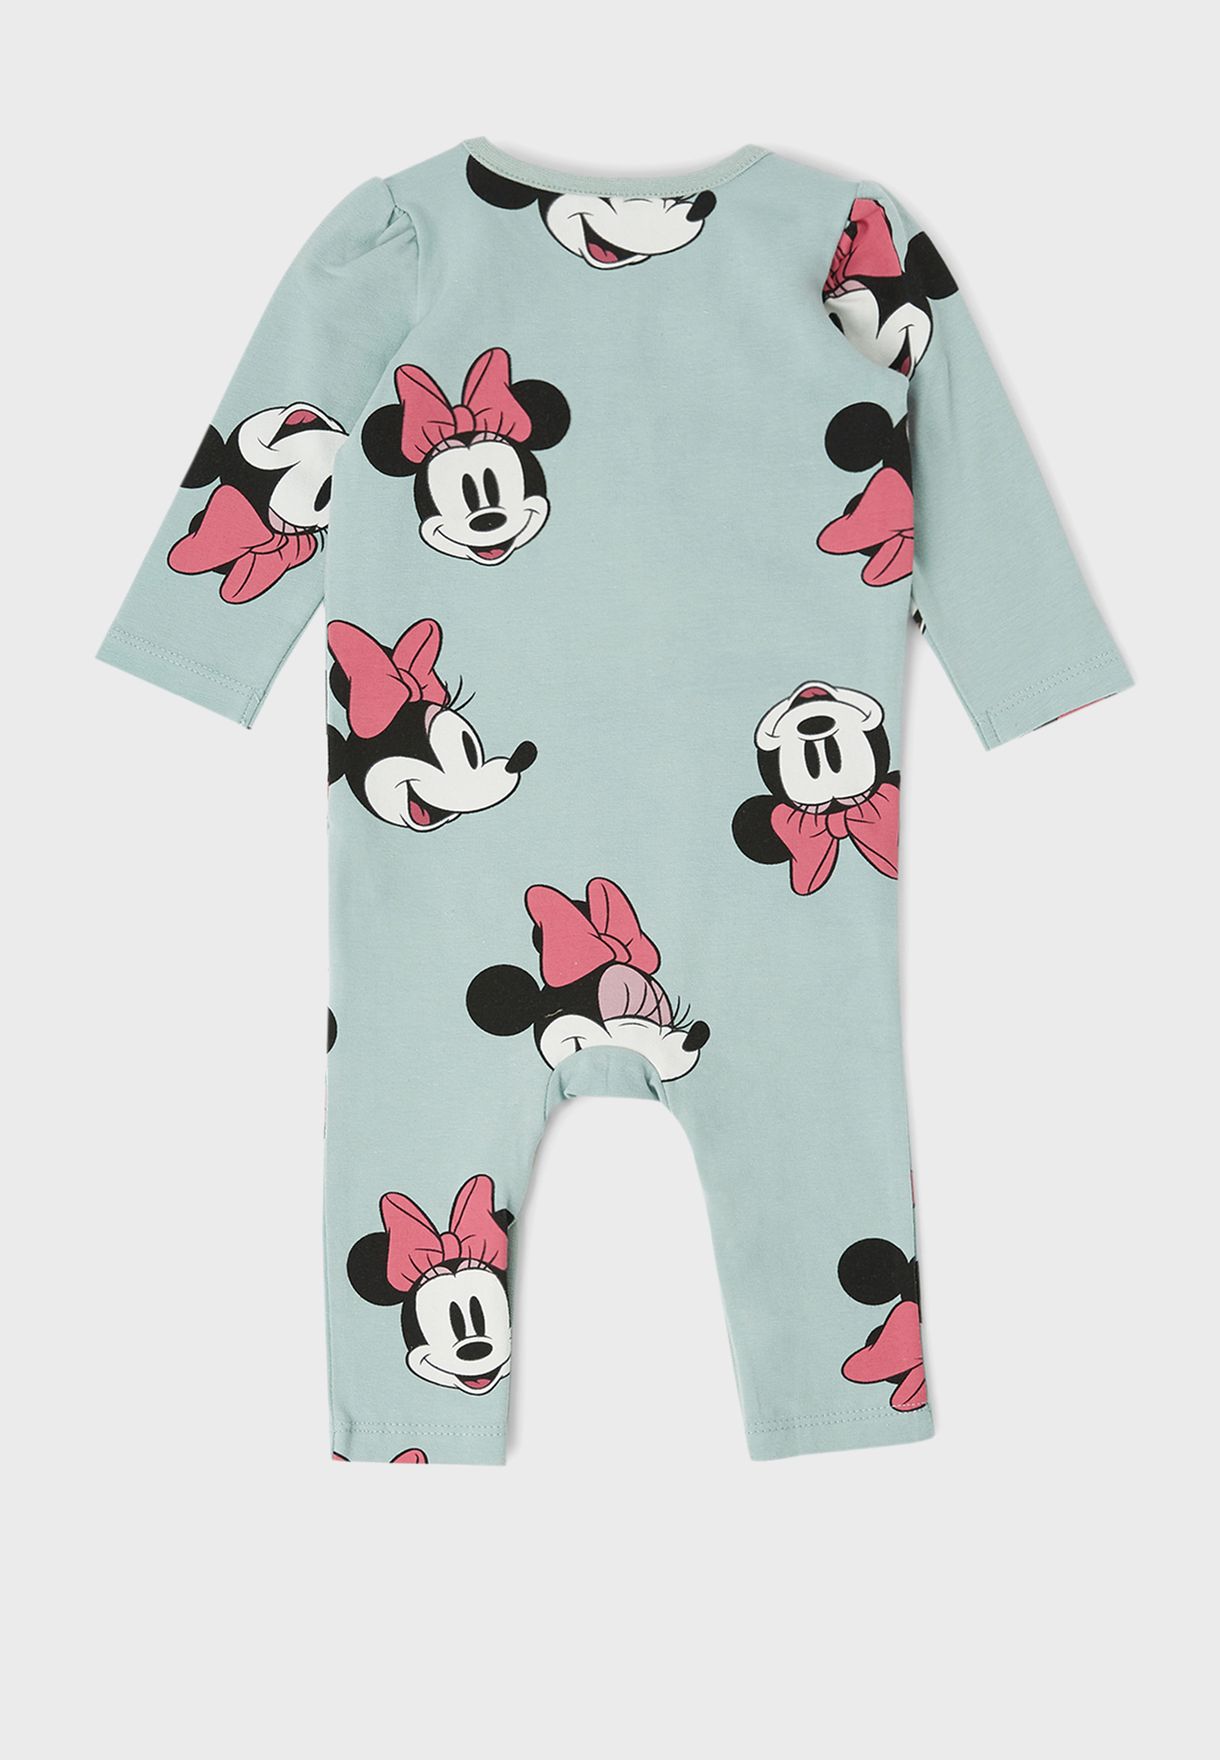 Kids Minnie Mouse Overalls